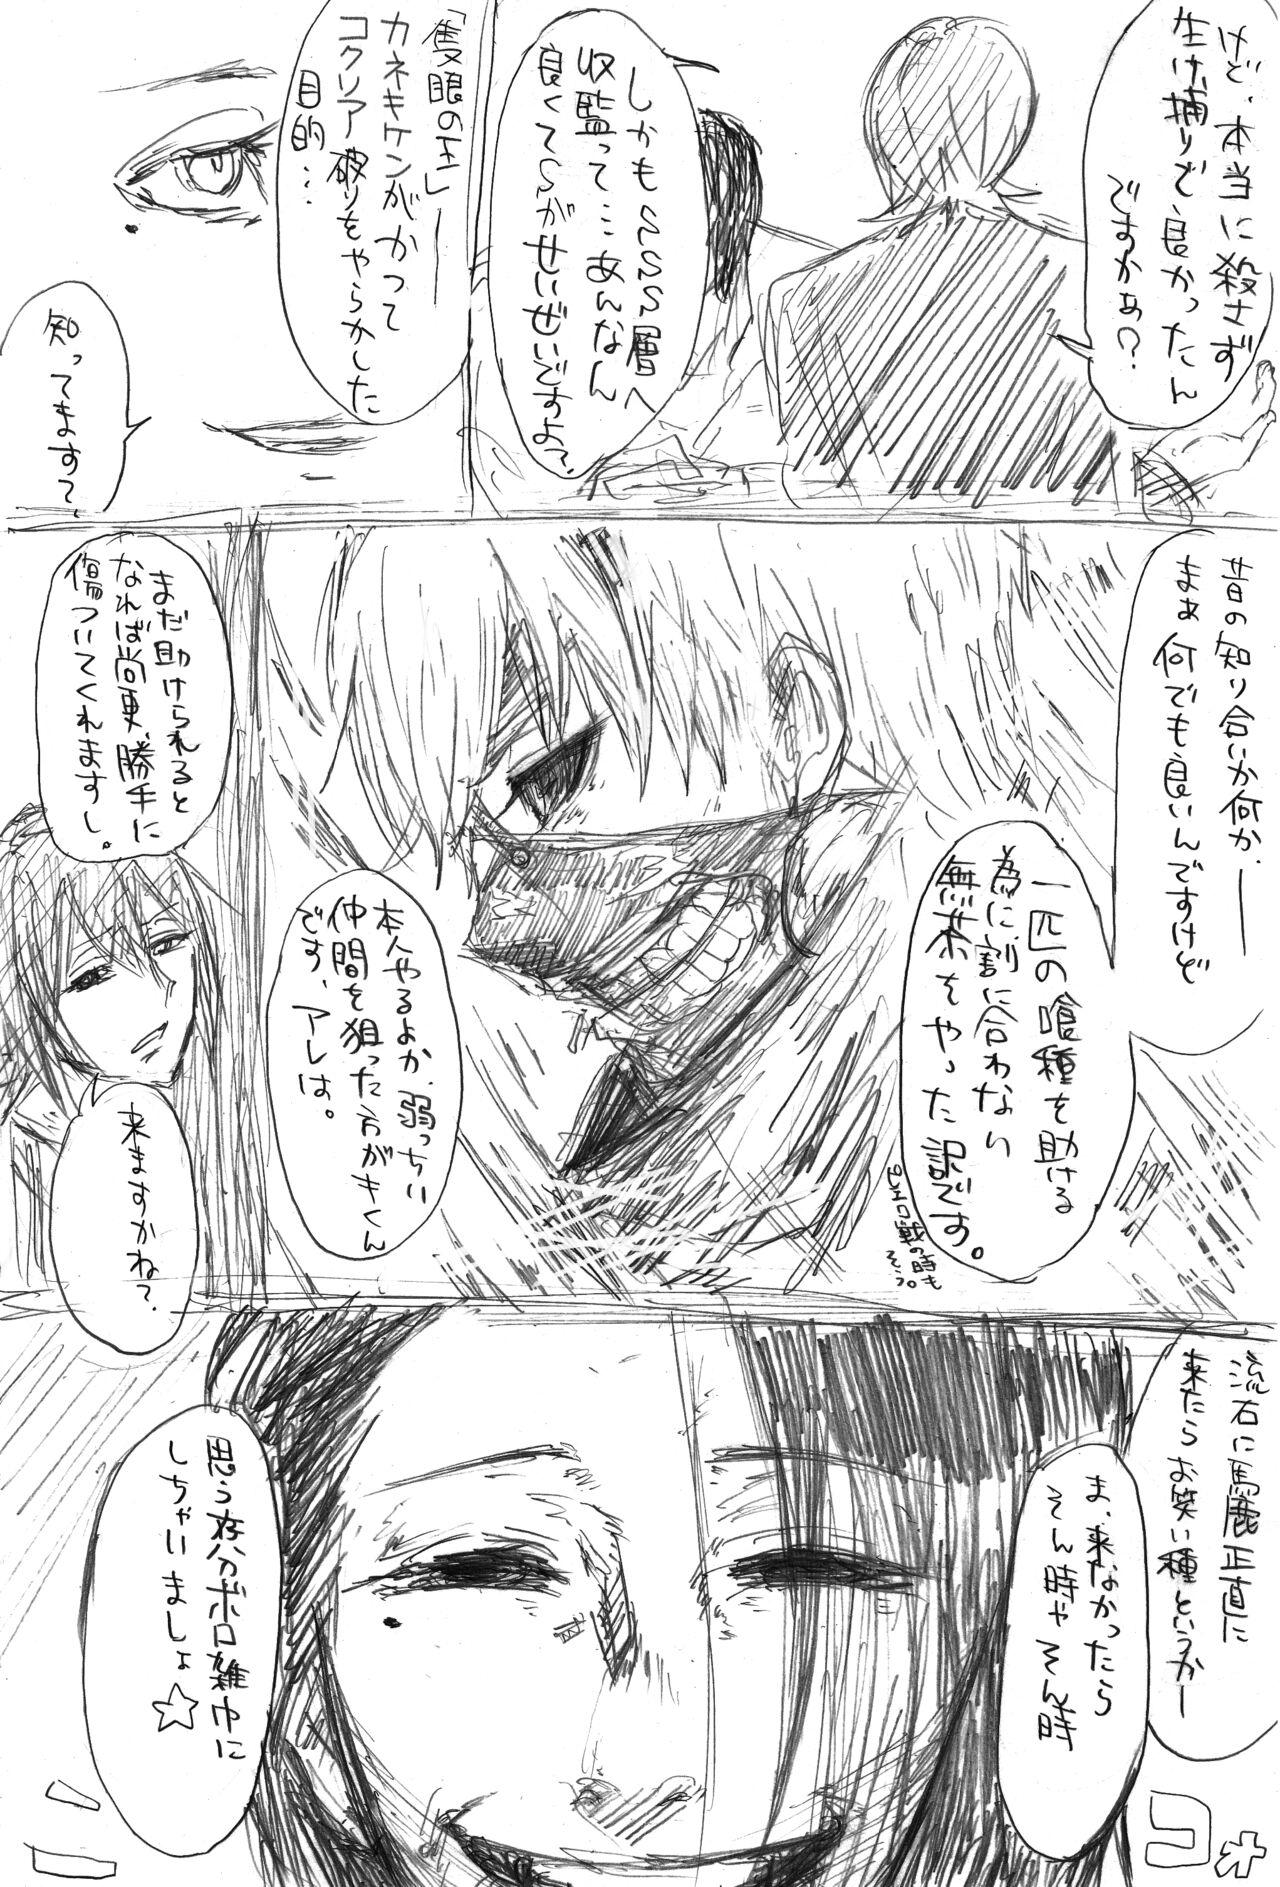 Masturbate トーカちゃん囚われIF - Tokyo ghoul Gay Oralsex - Page 2